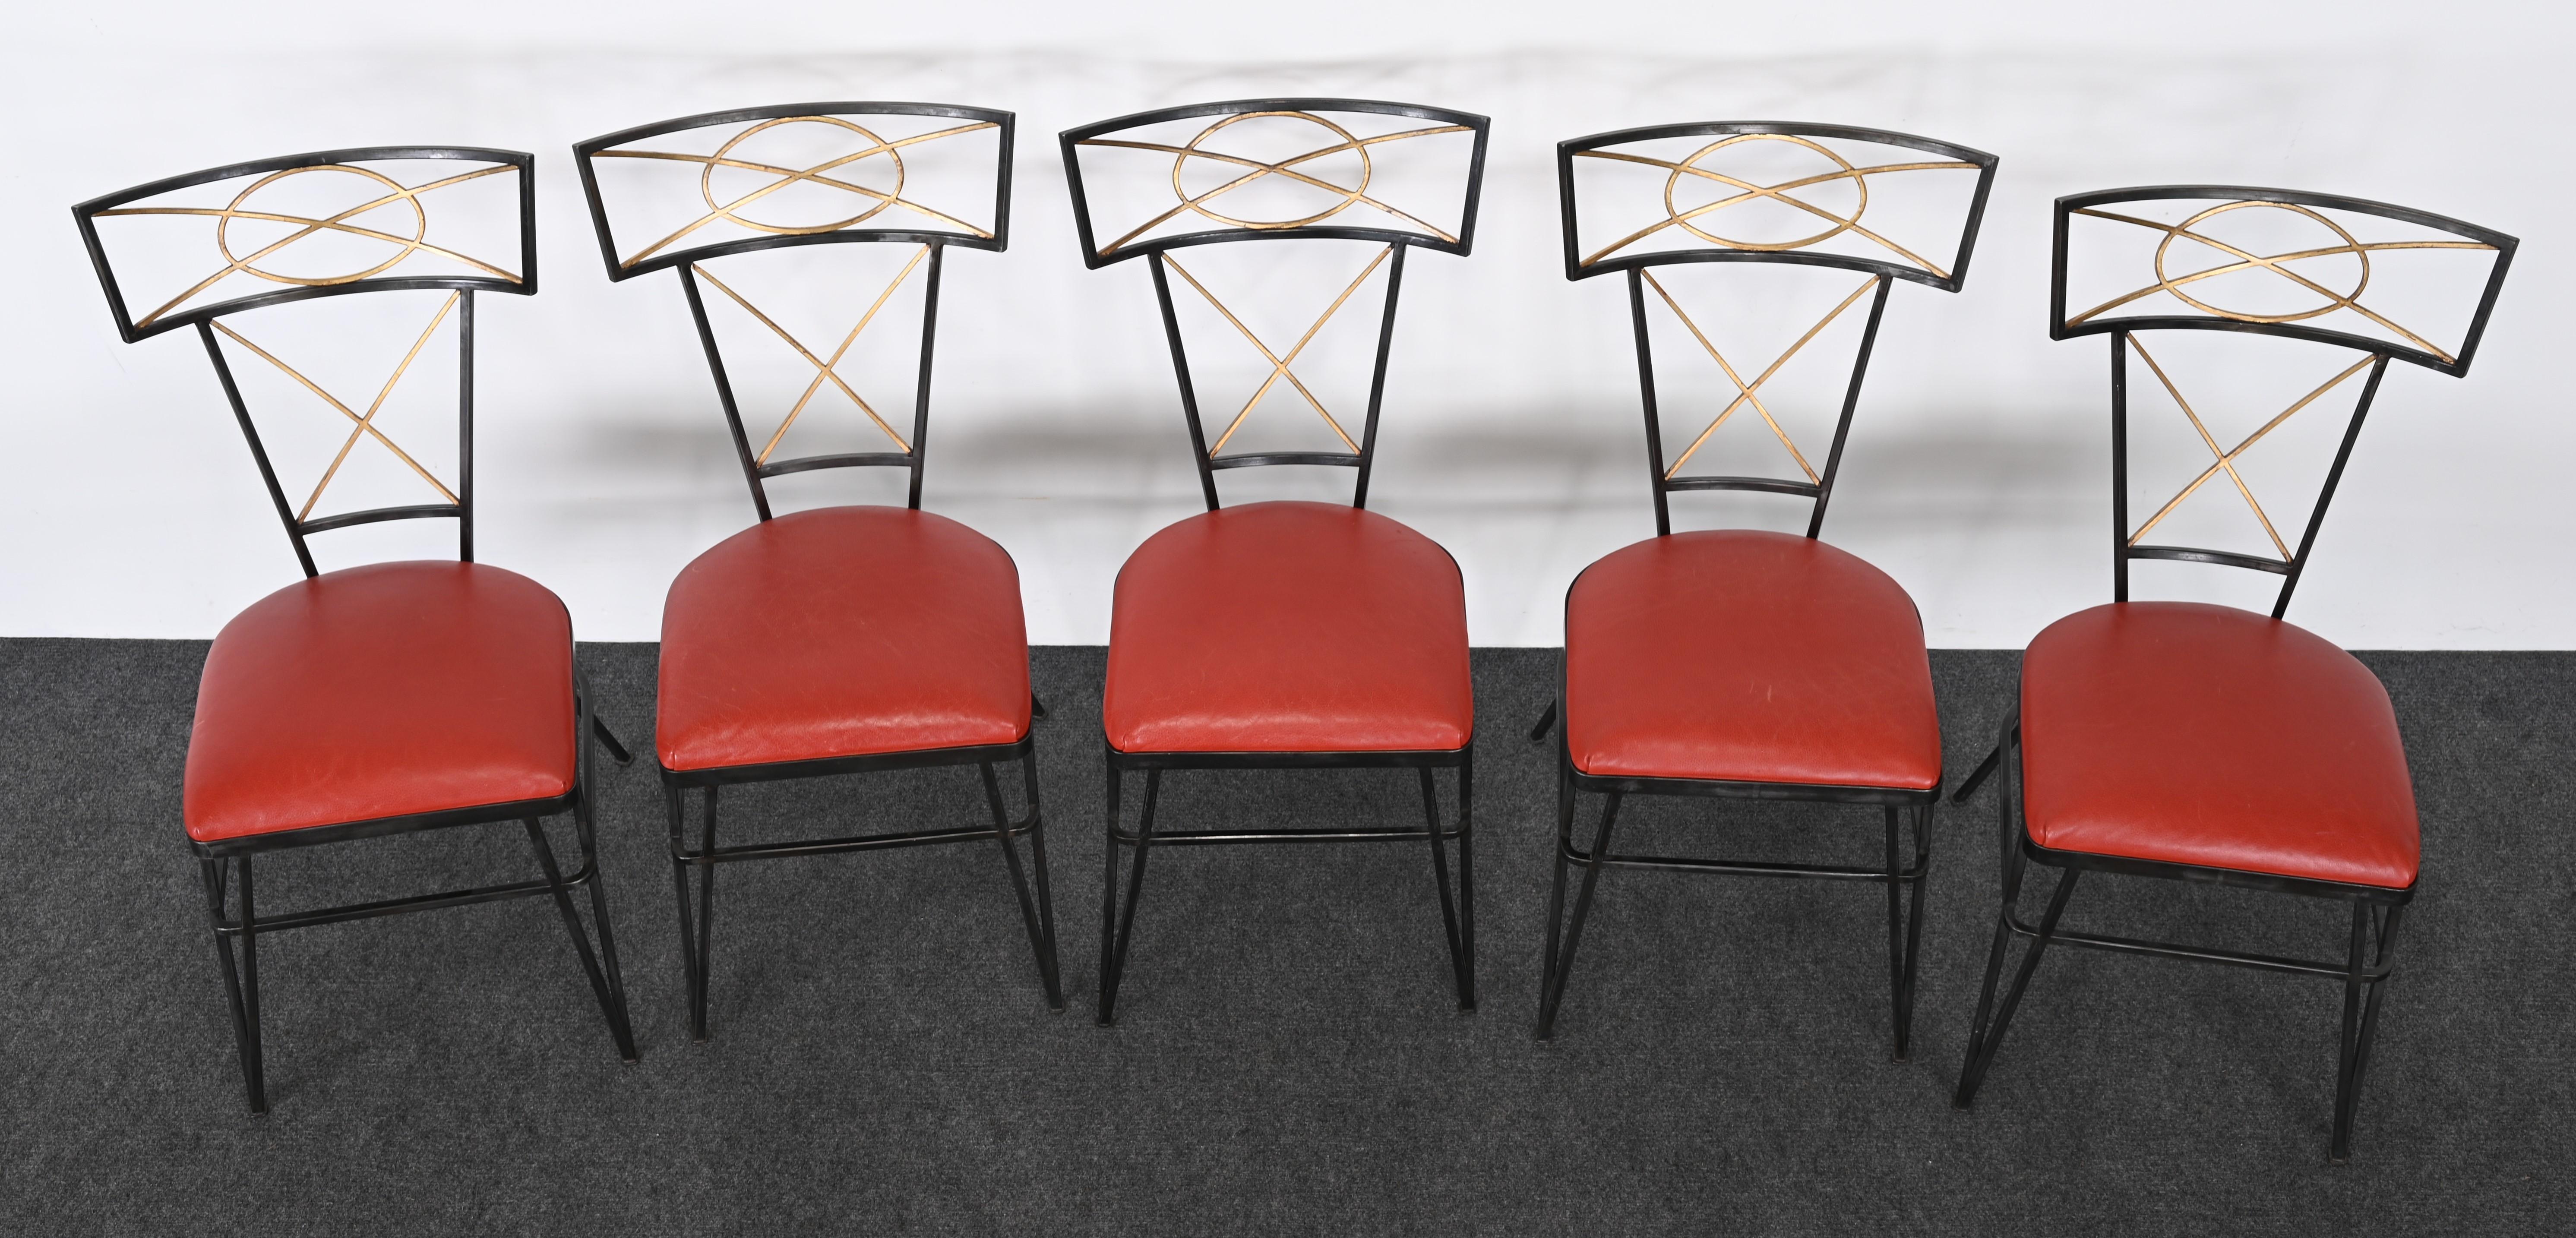 Set of Ten Steel and Gold Gilt Neoclassical Chairs, 20th Century For Sale 6